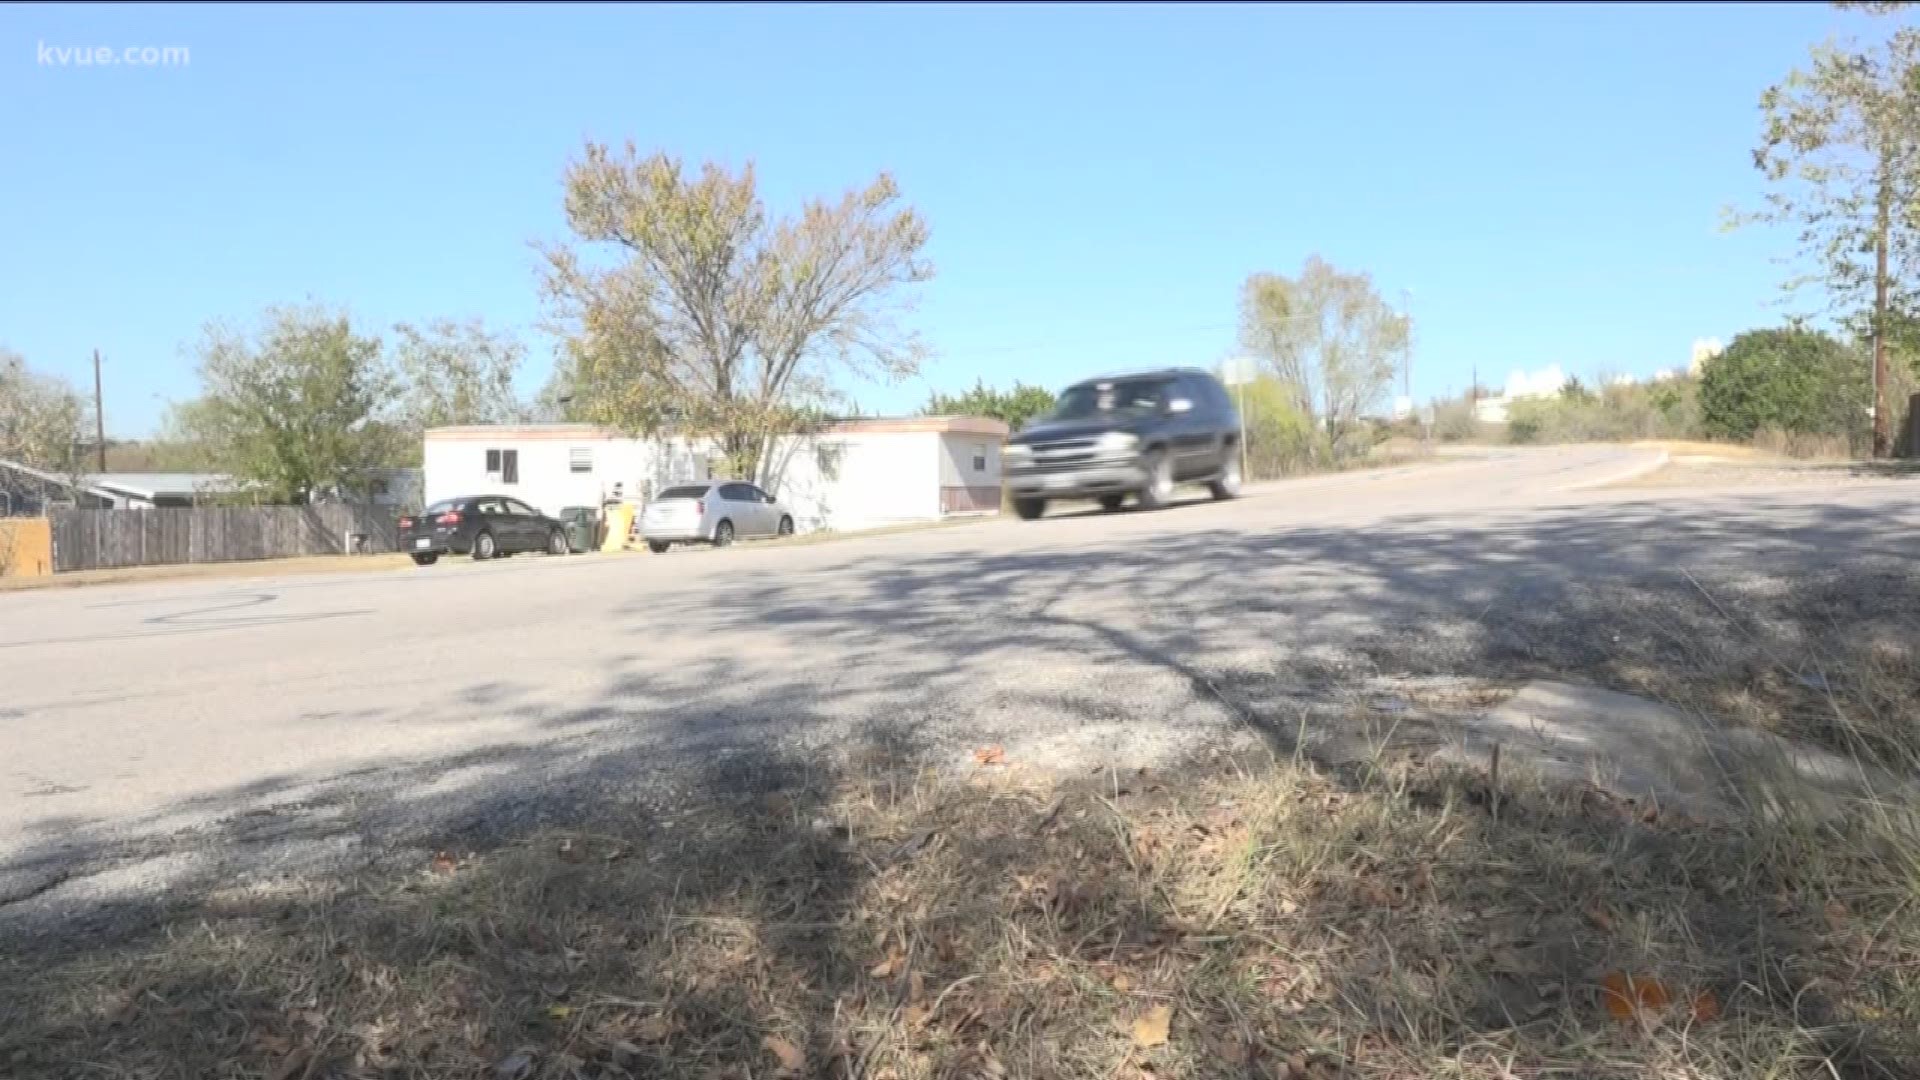 Neighbors in East Travis County say something needs to be done about what they call a dangerous intersection.